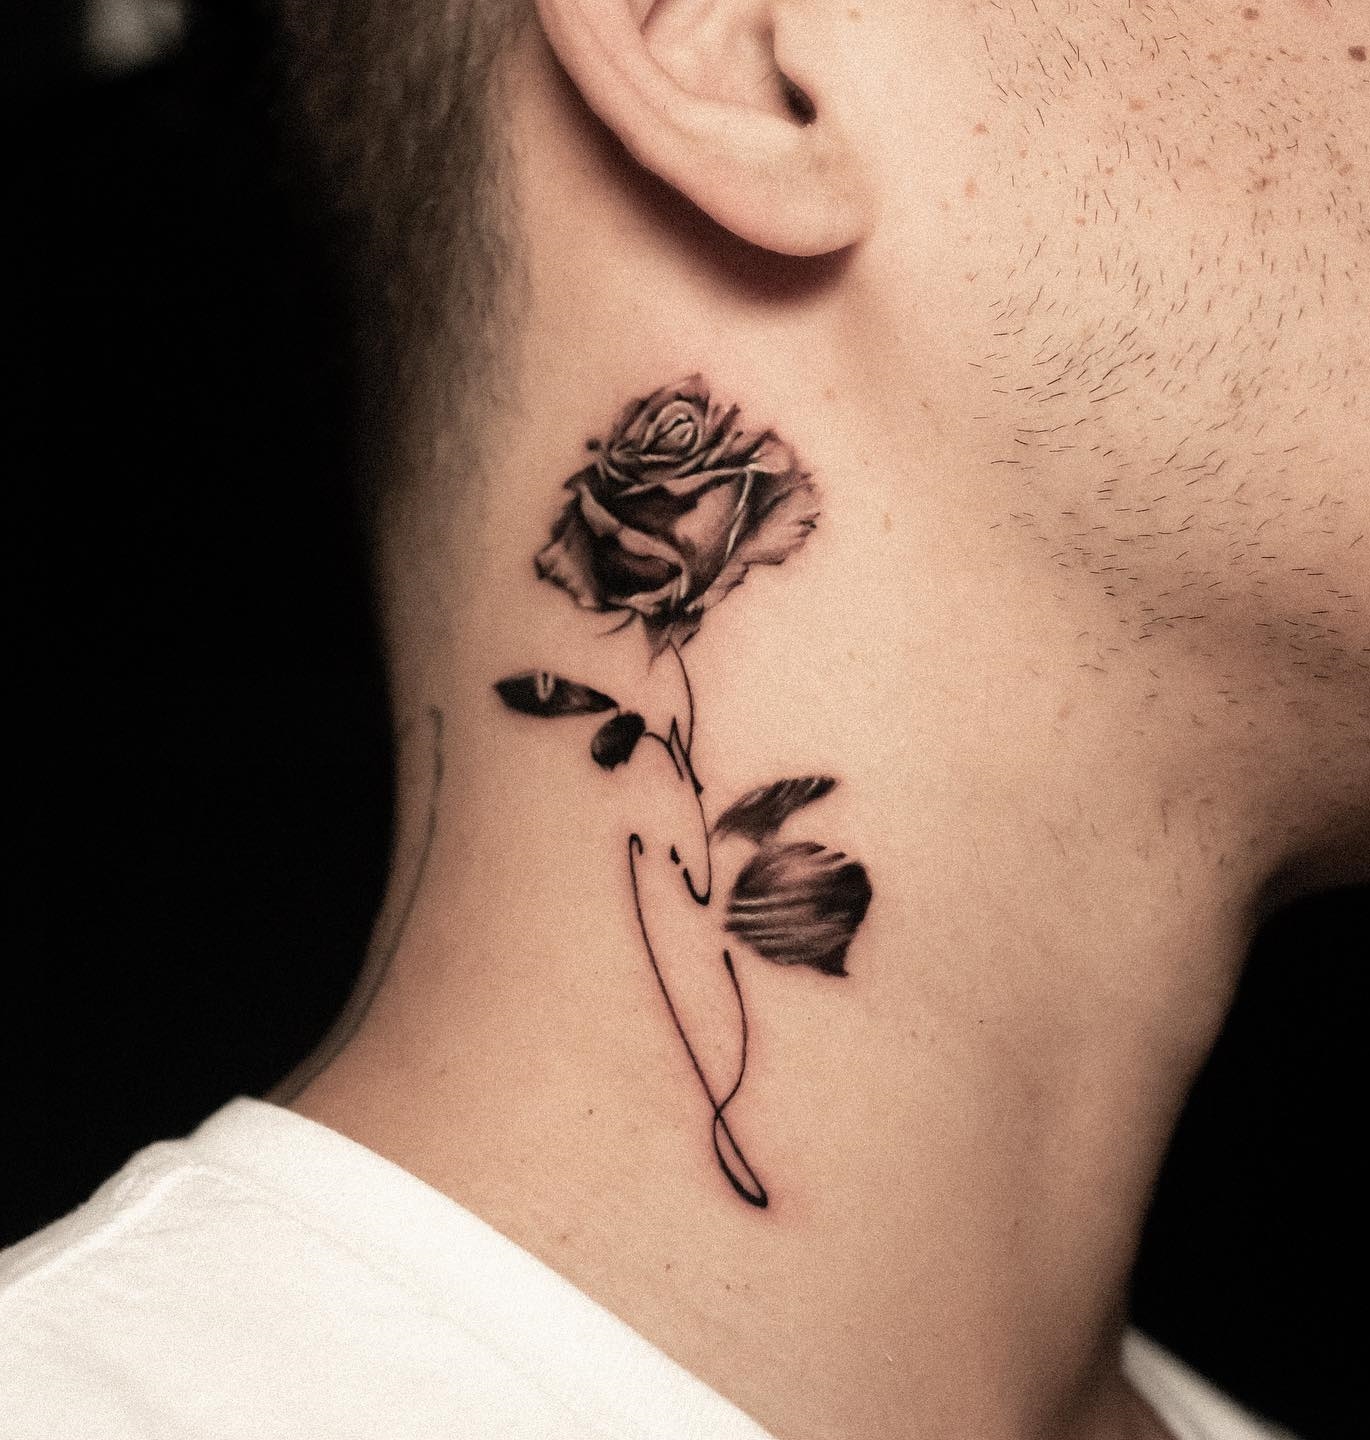 Tattoo uploaded by Justine Morrow  Neck tattoo by Jaylind Hamilton  JaylindHamilton nationalcomingoutday queer qttr lgbt lgbtqia  necktattoo unalome flowers floral peony rose neck  Tattoodo